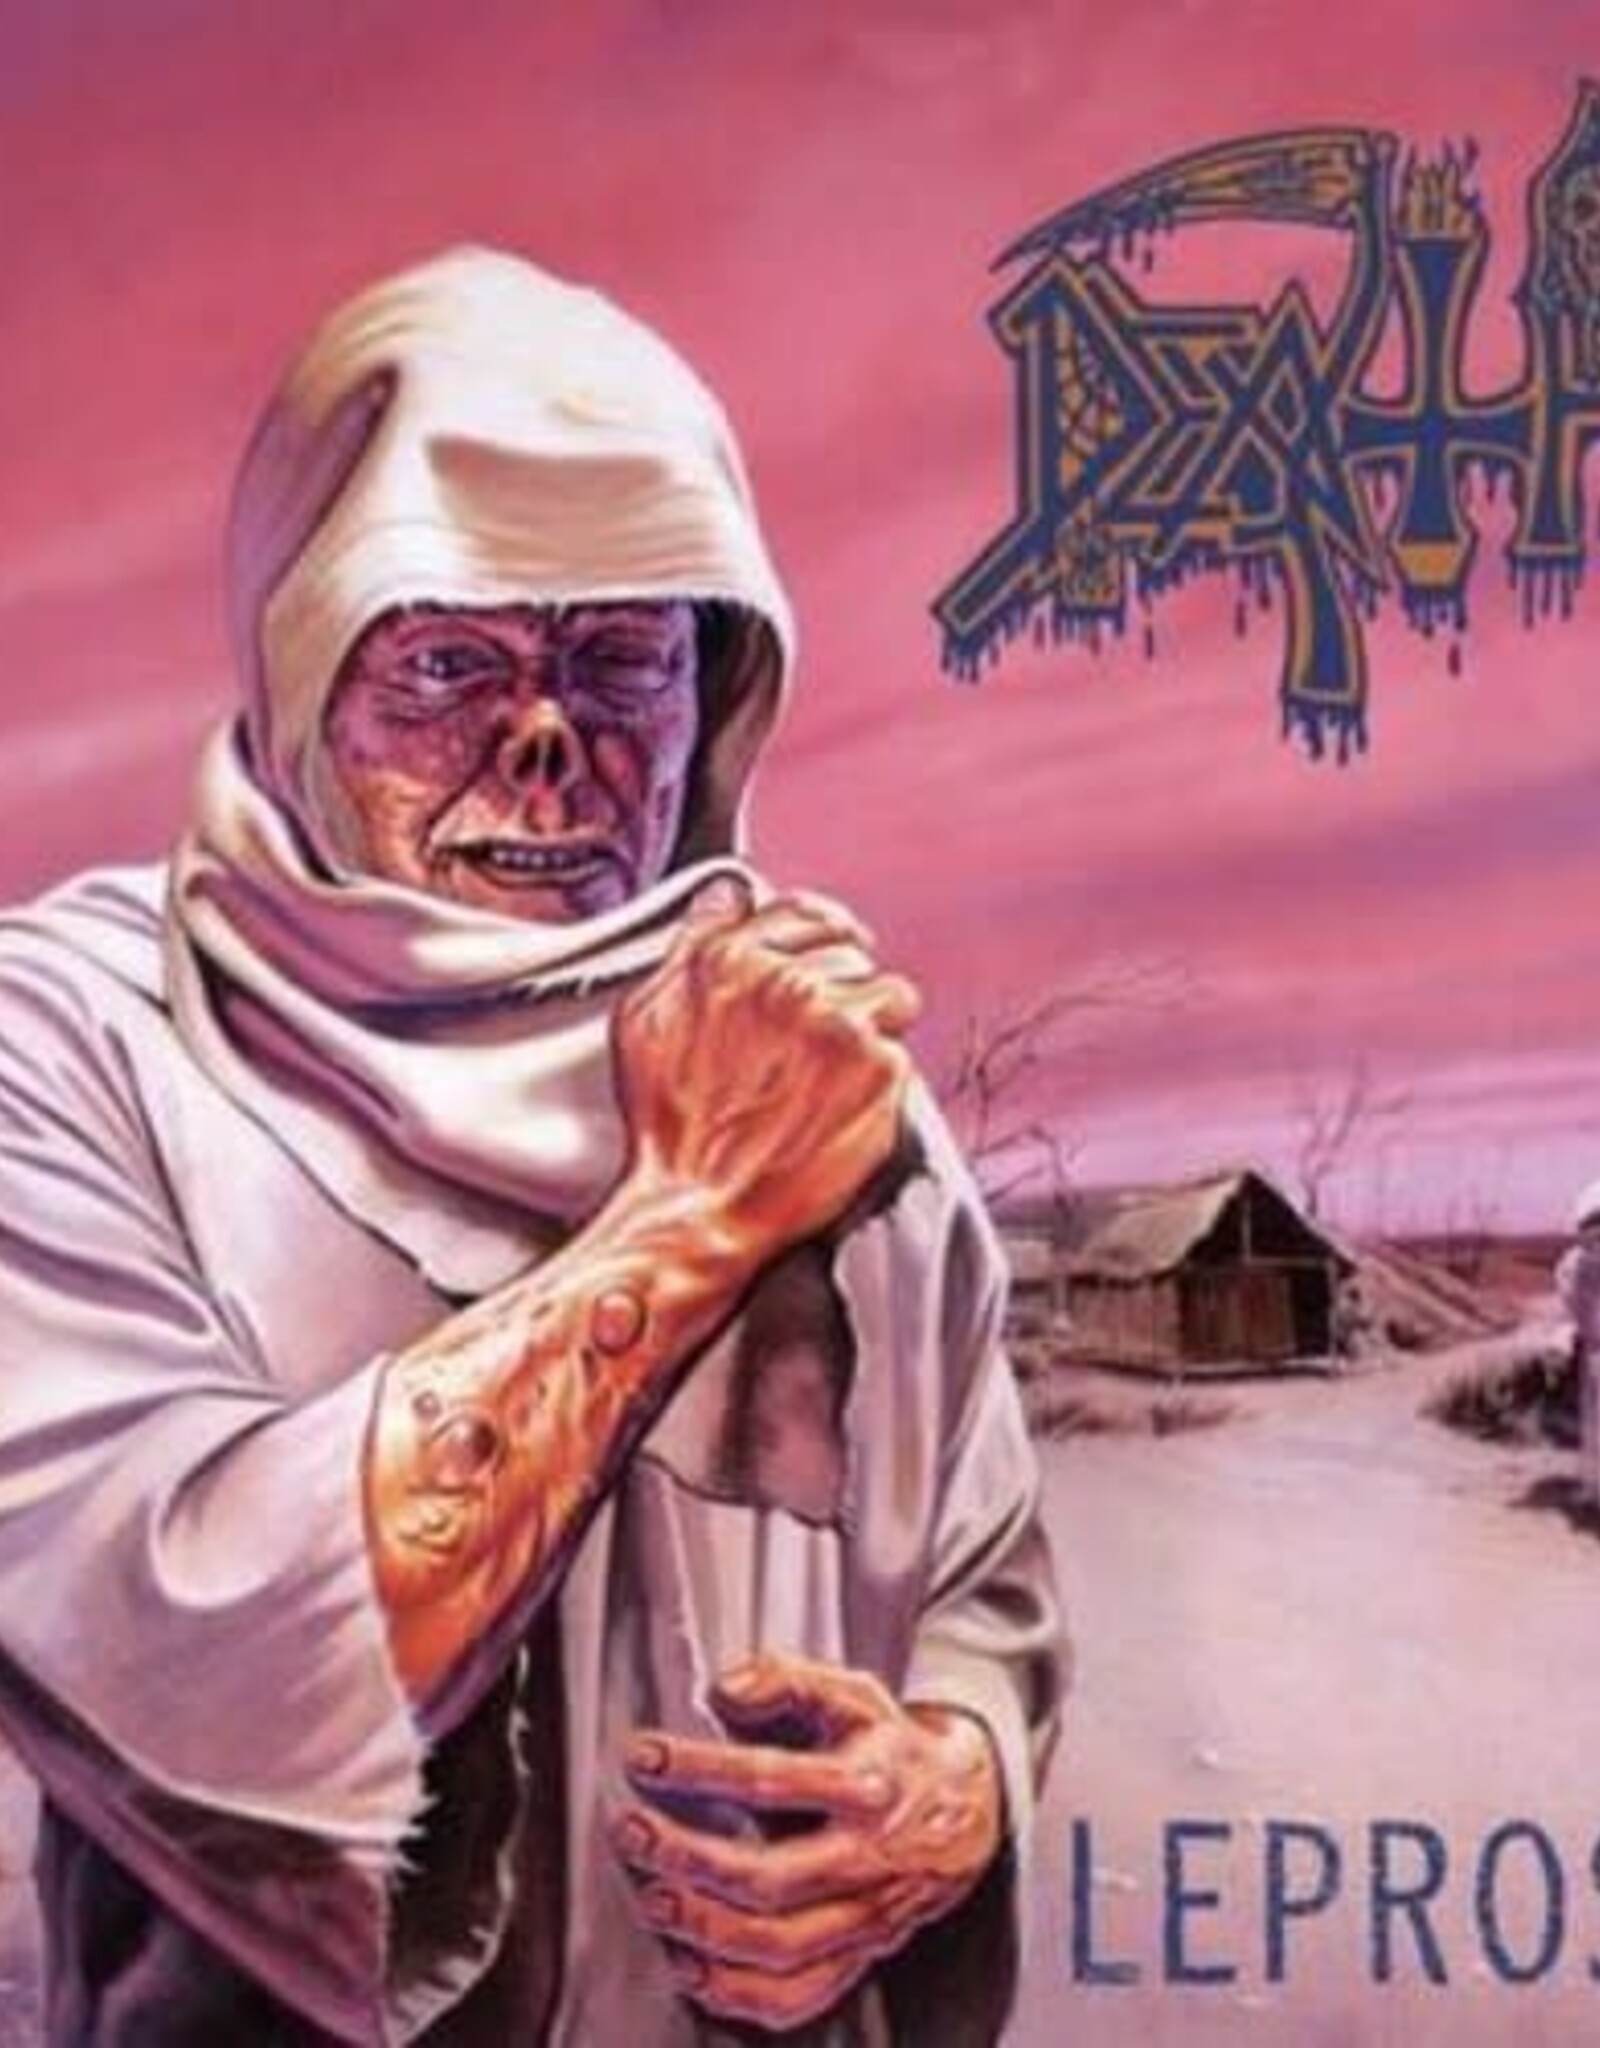 Death - Leprosy (Color Vinyl)